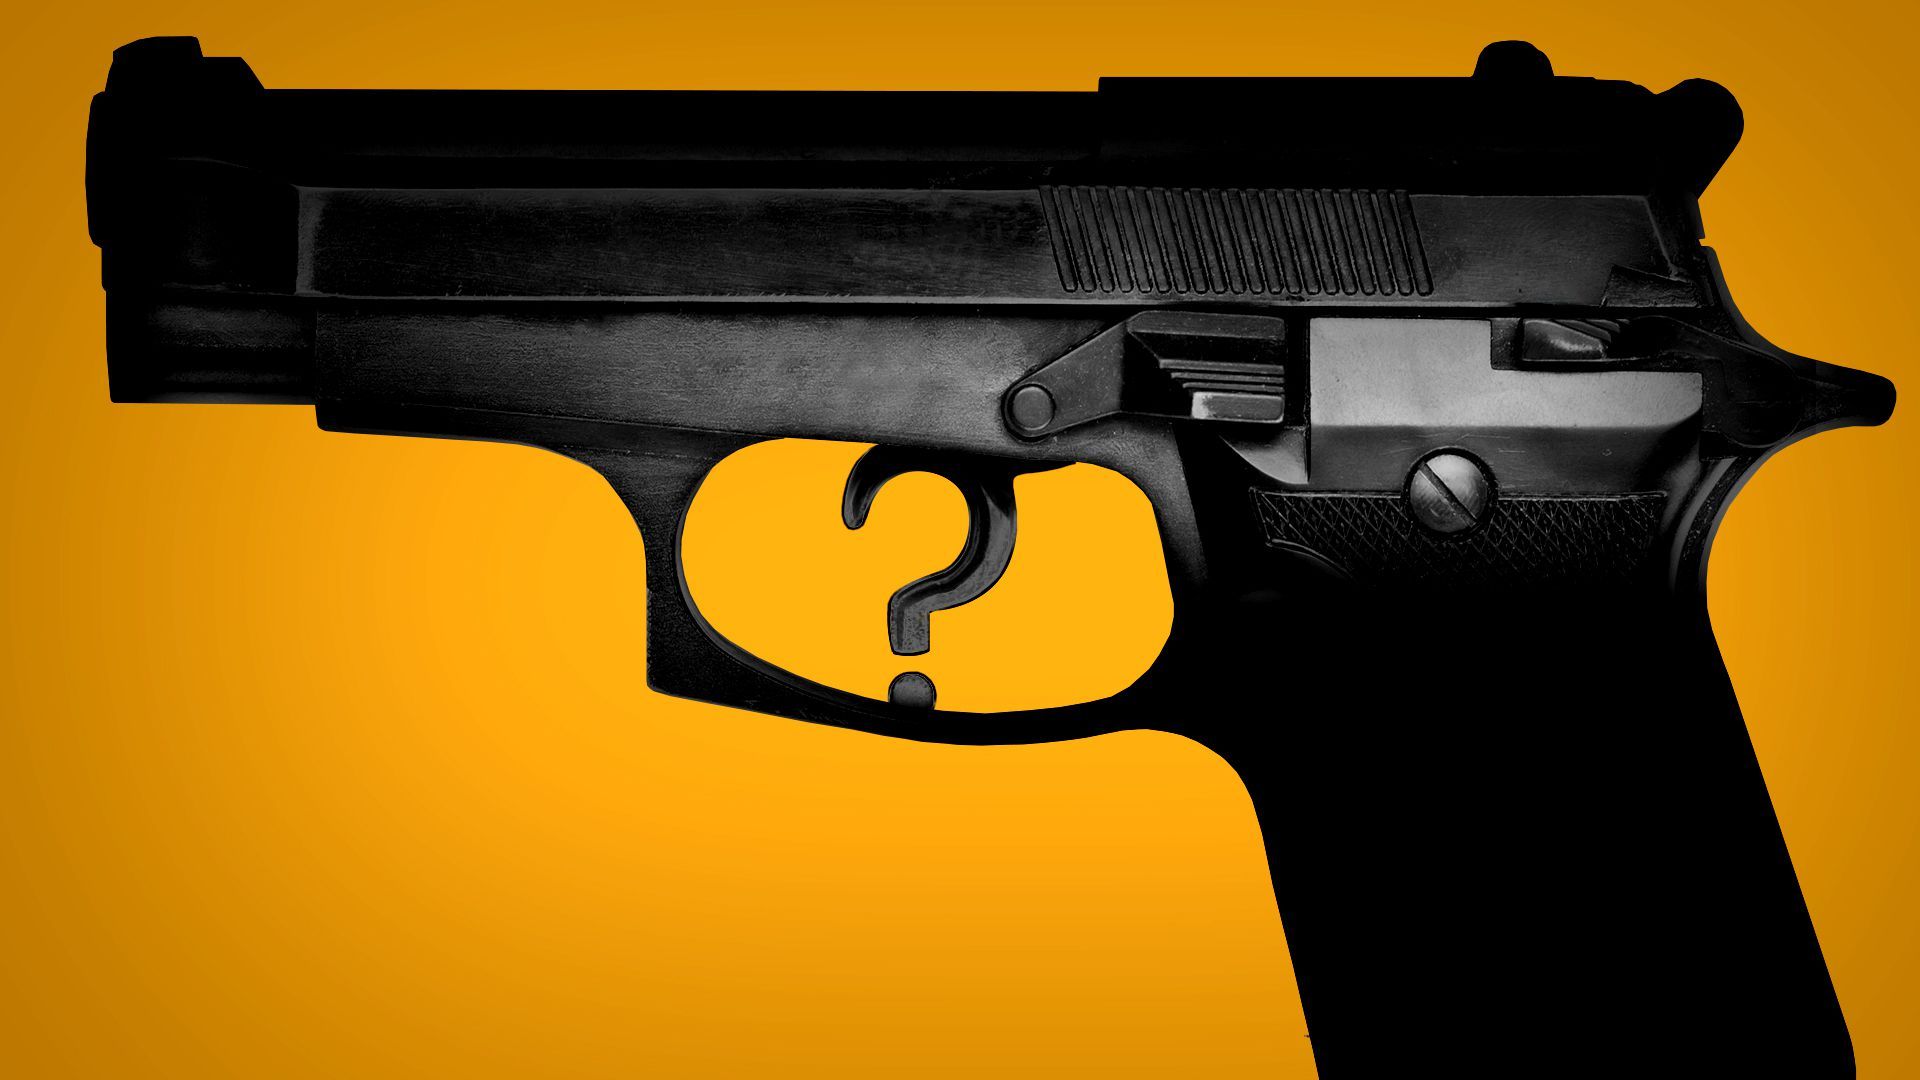 Illustration of a gun with a trigger in the shape of a question mark